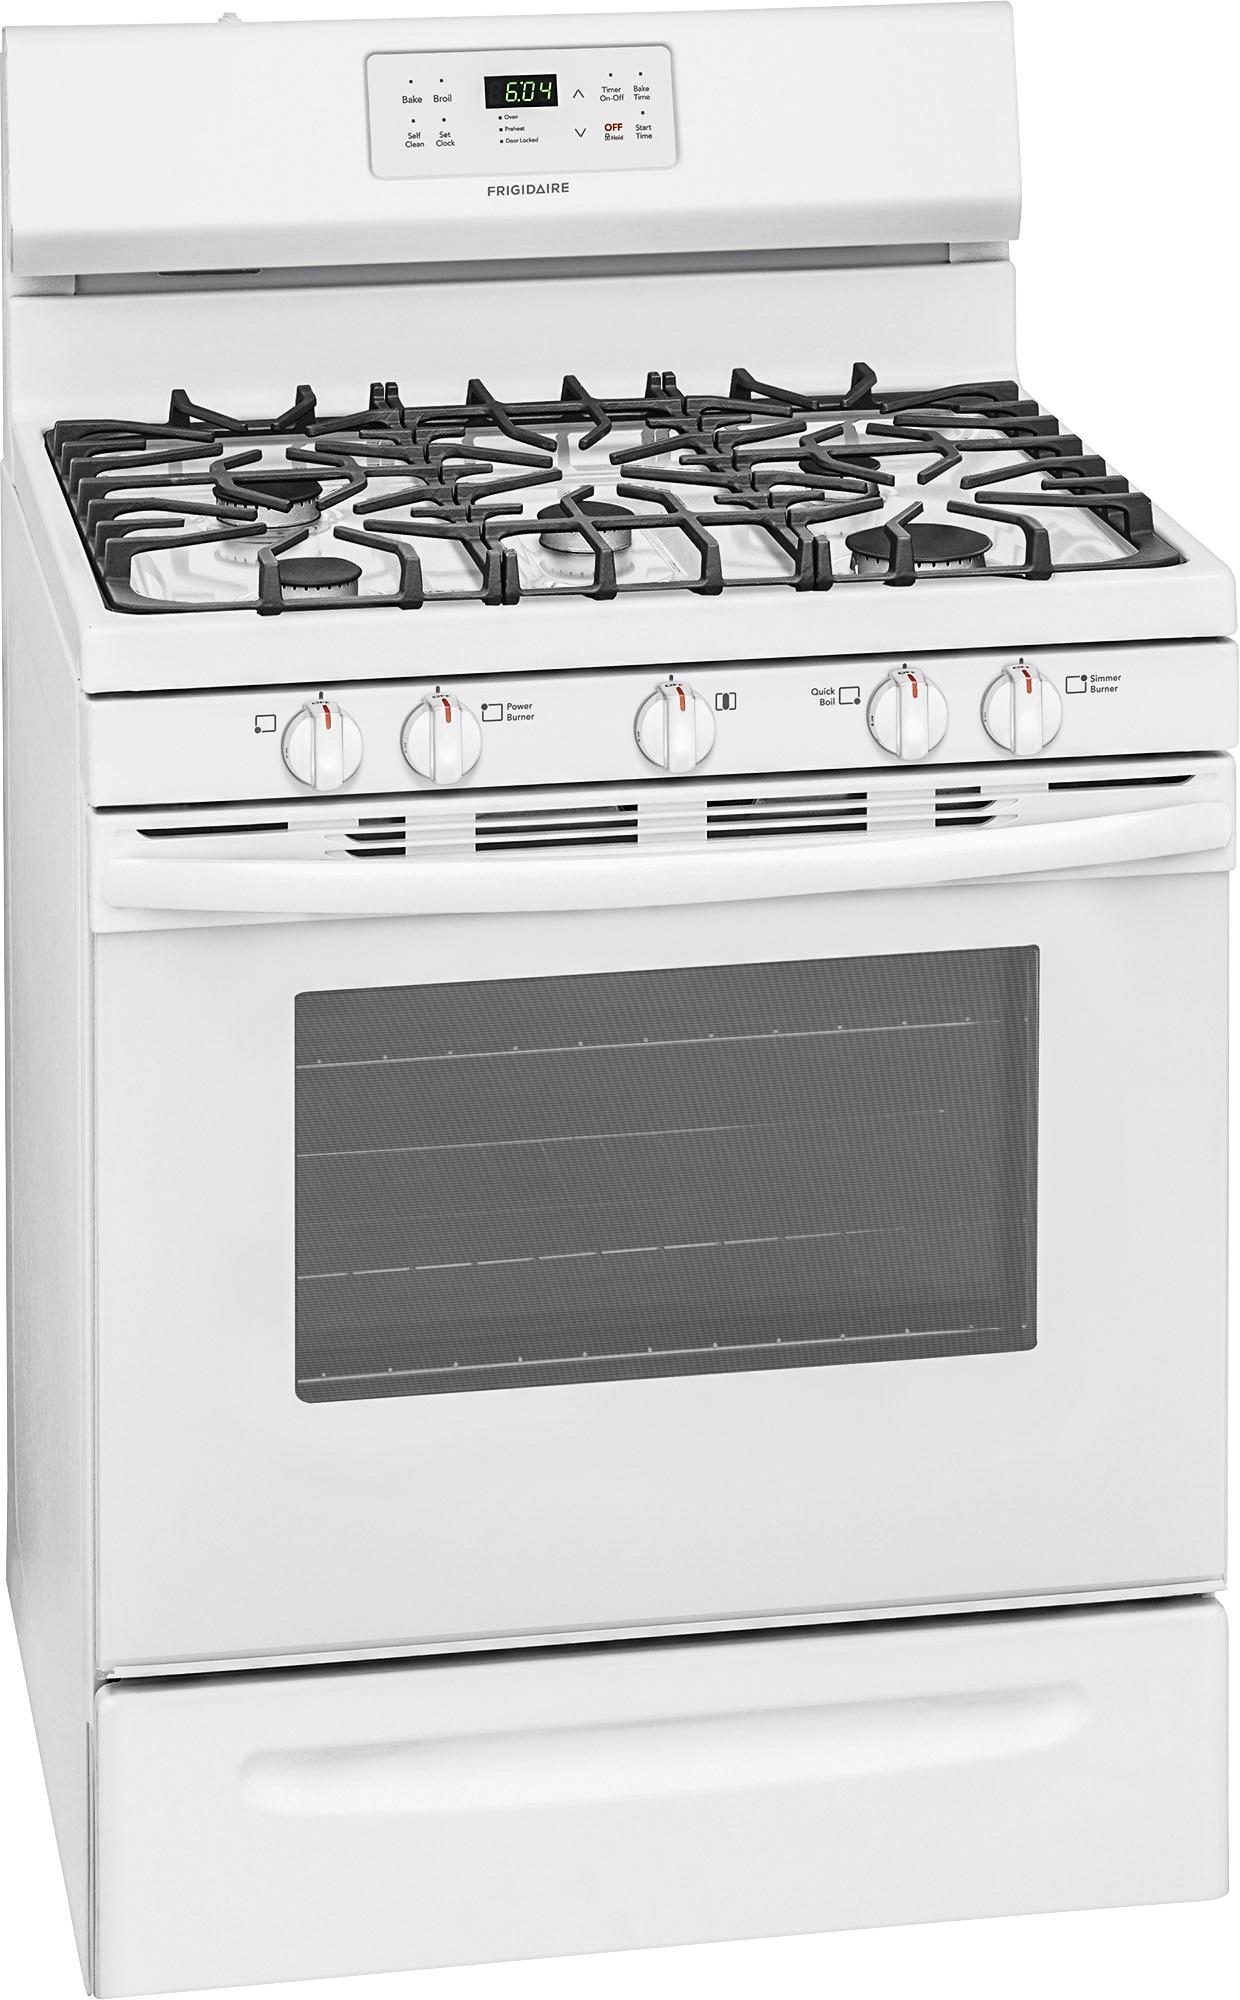 Angle View: Frigidaire - 1.9 Cu. Ft. Freestanding Electric Smoothtop Range - Stainless steel